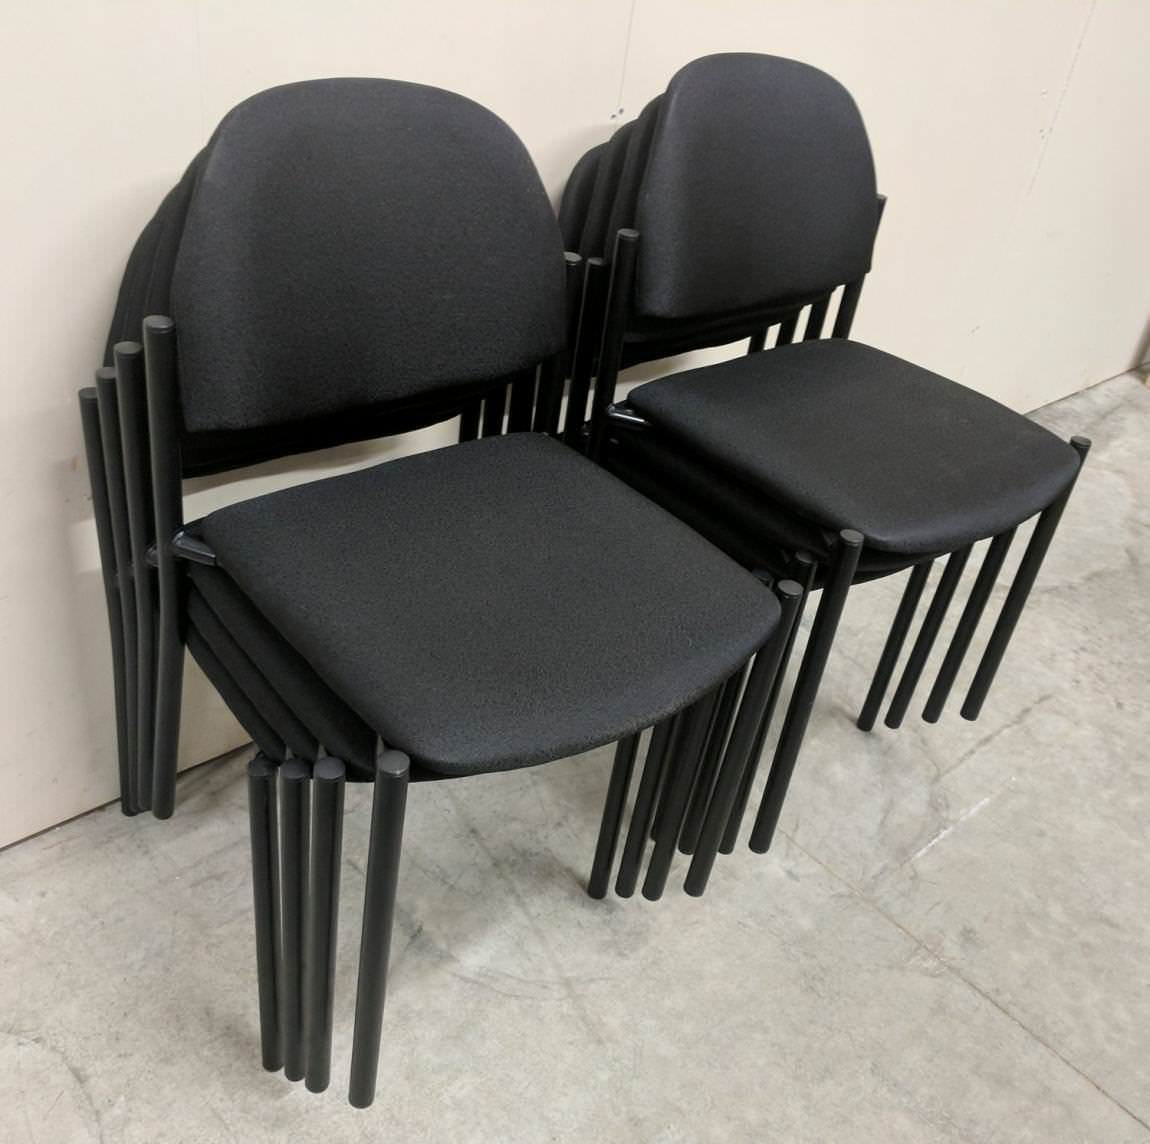 Global Comet Black Stacking Guest Chairs